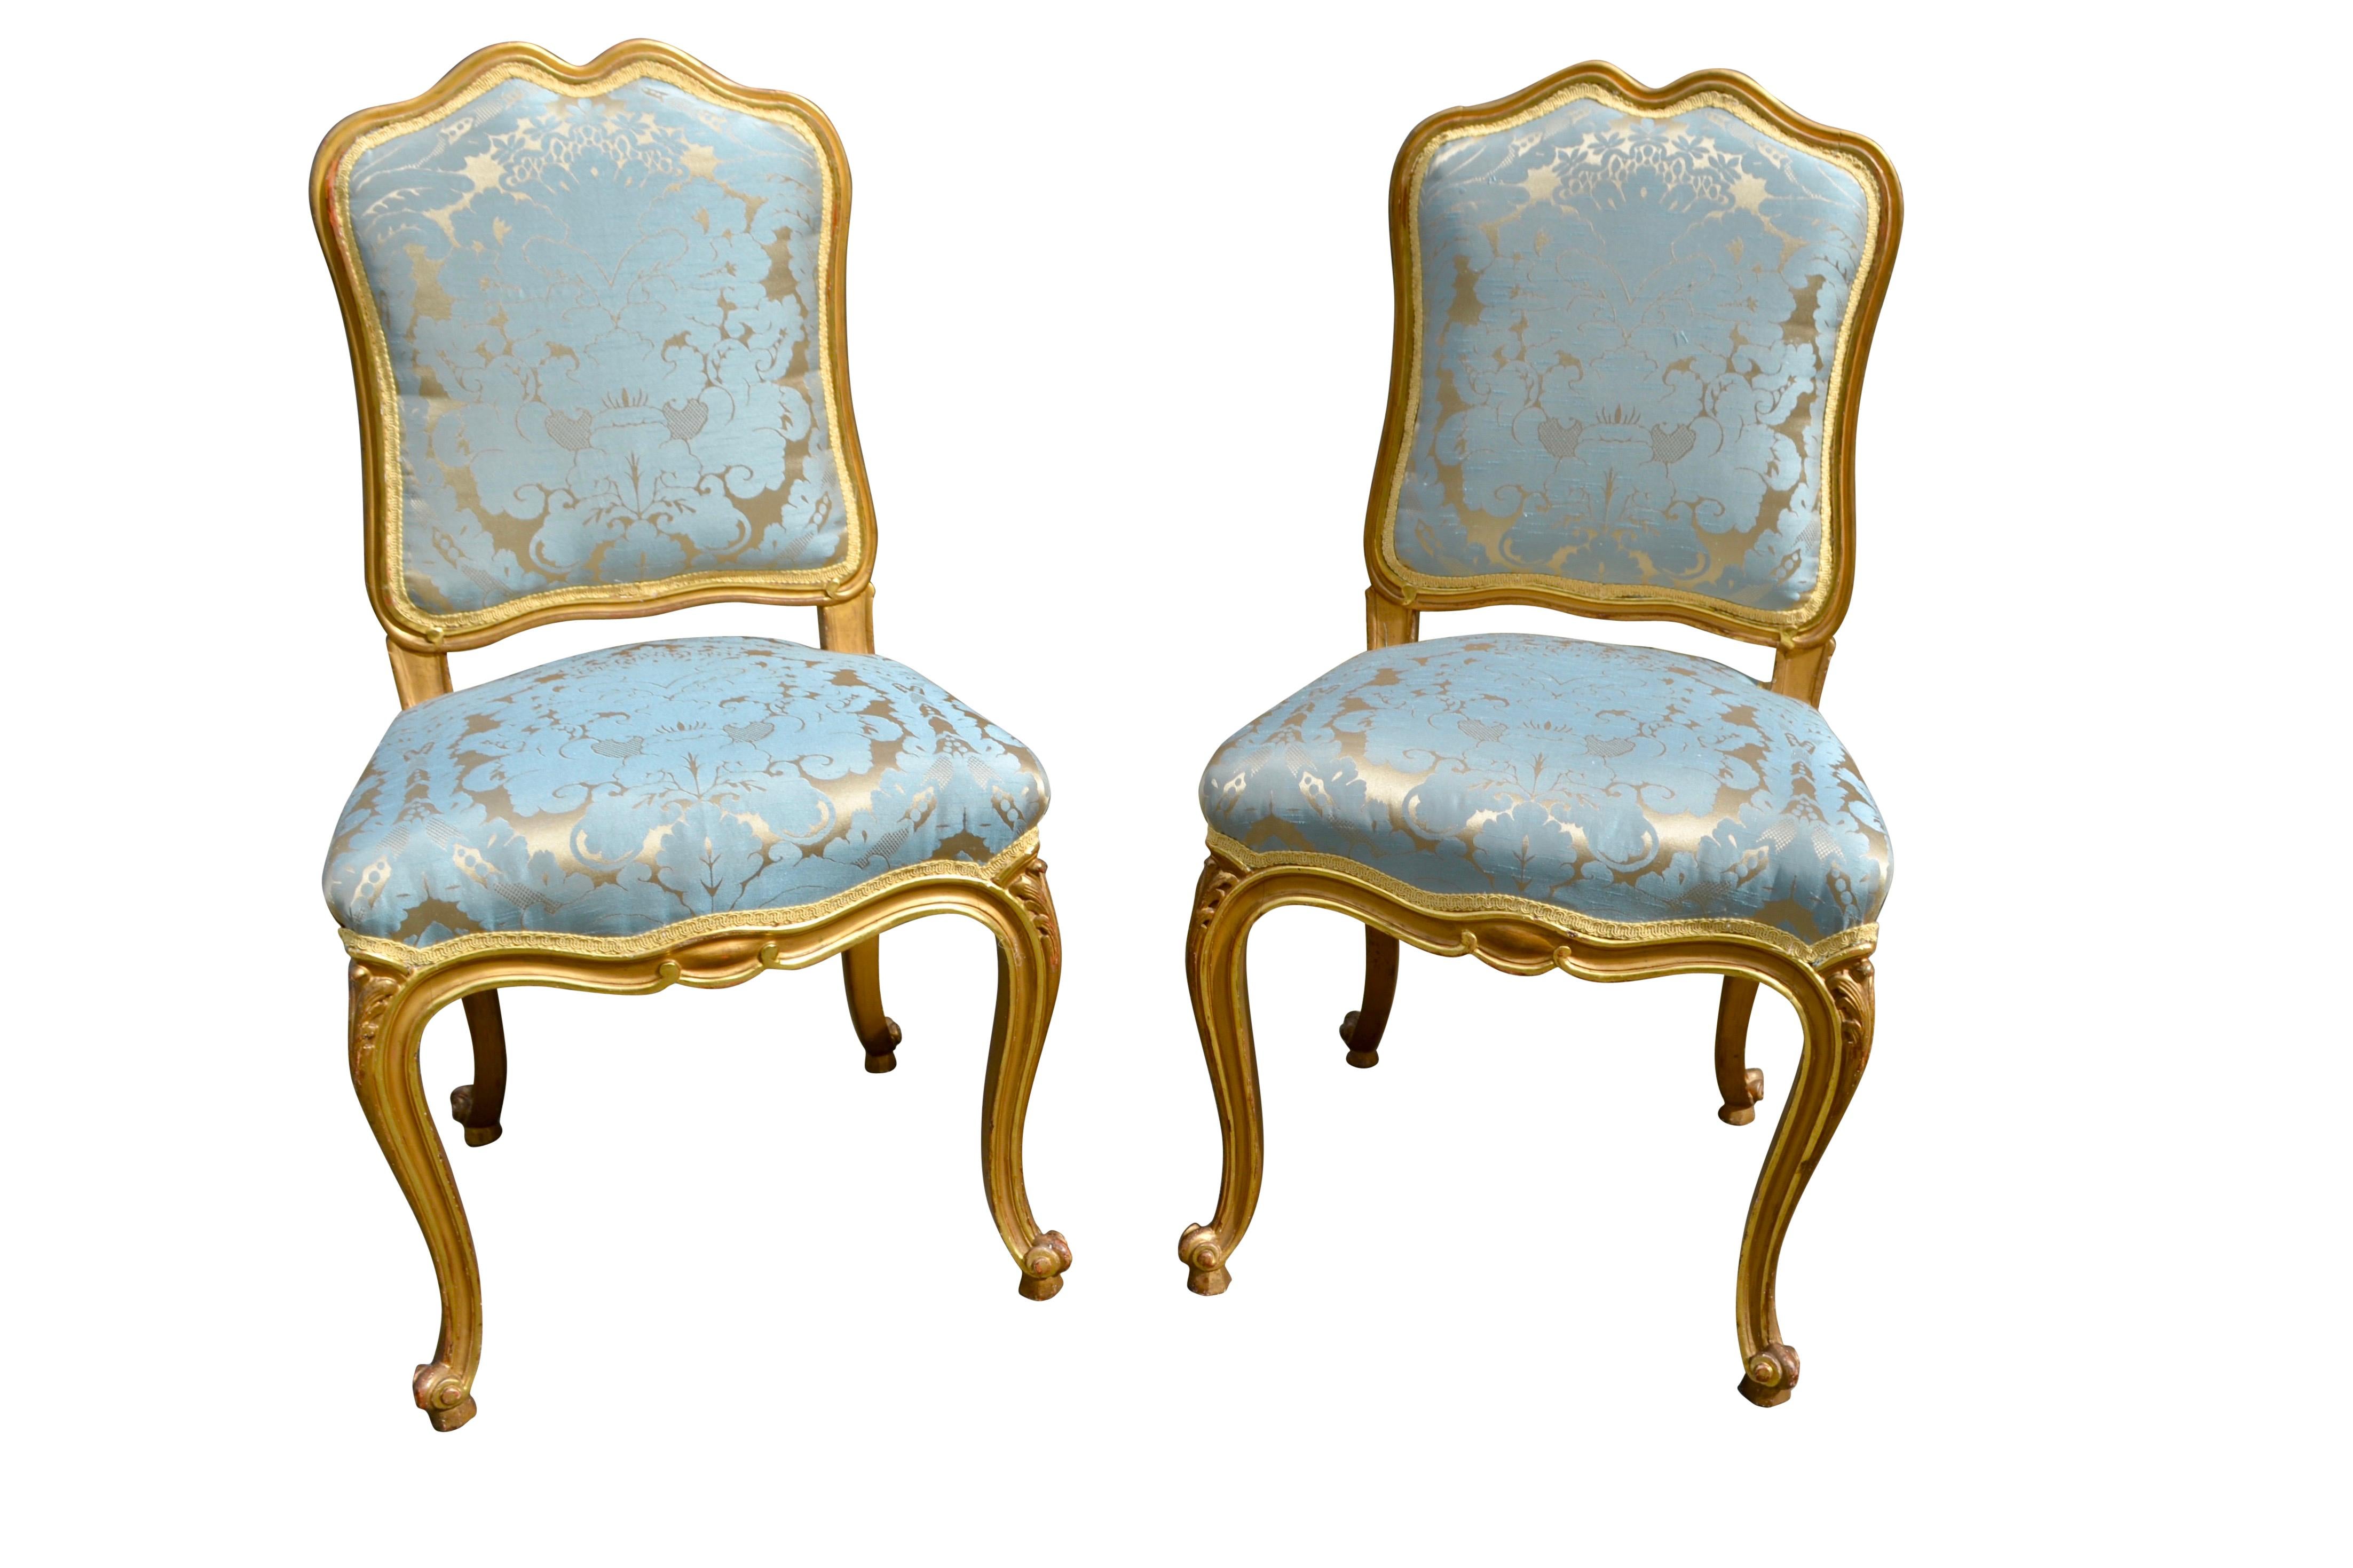 A decorative pair of Louis XV style side chairs, the well carved frames are finished in gold leaf and have recently been upholstered in a turquoise/gilt damask.